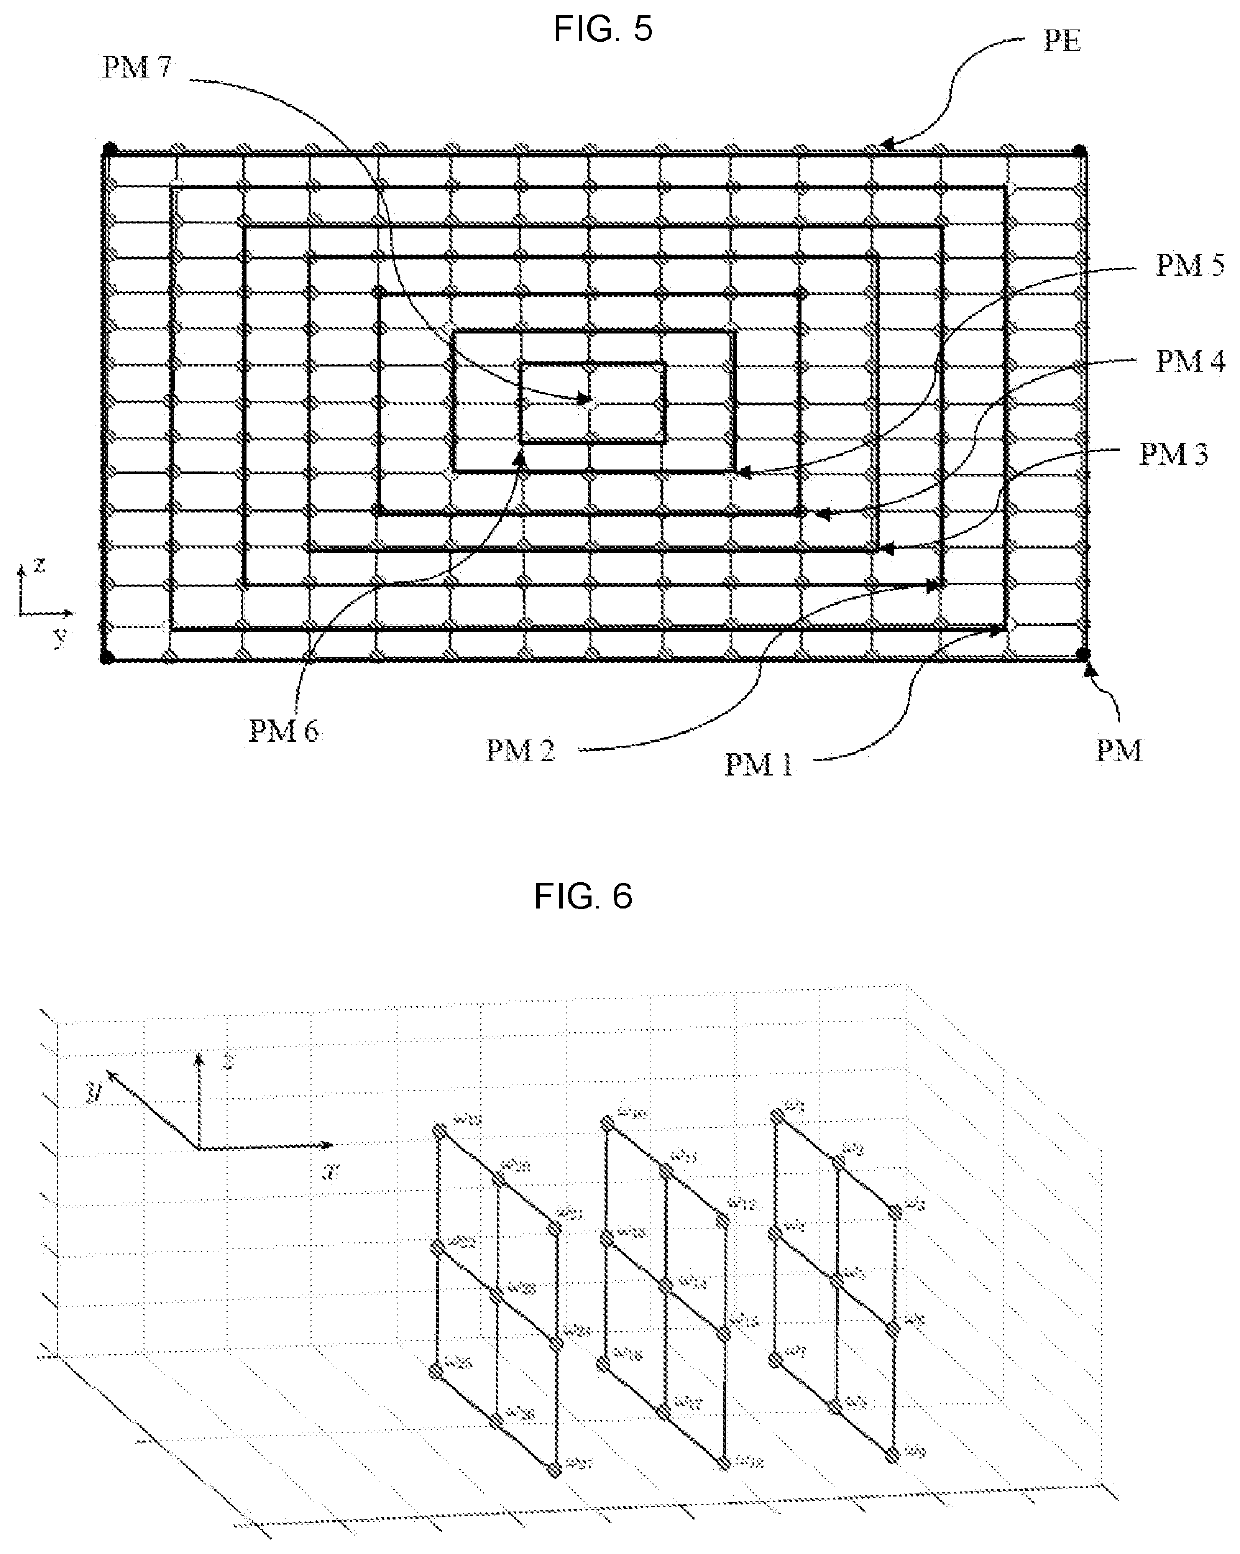 Method for Acquiring and Modelling with a Lidar Sensor an Incident Wind Field